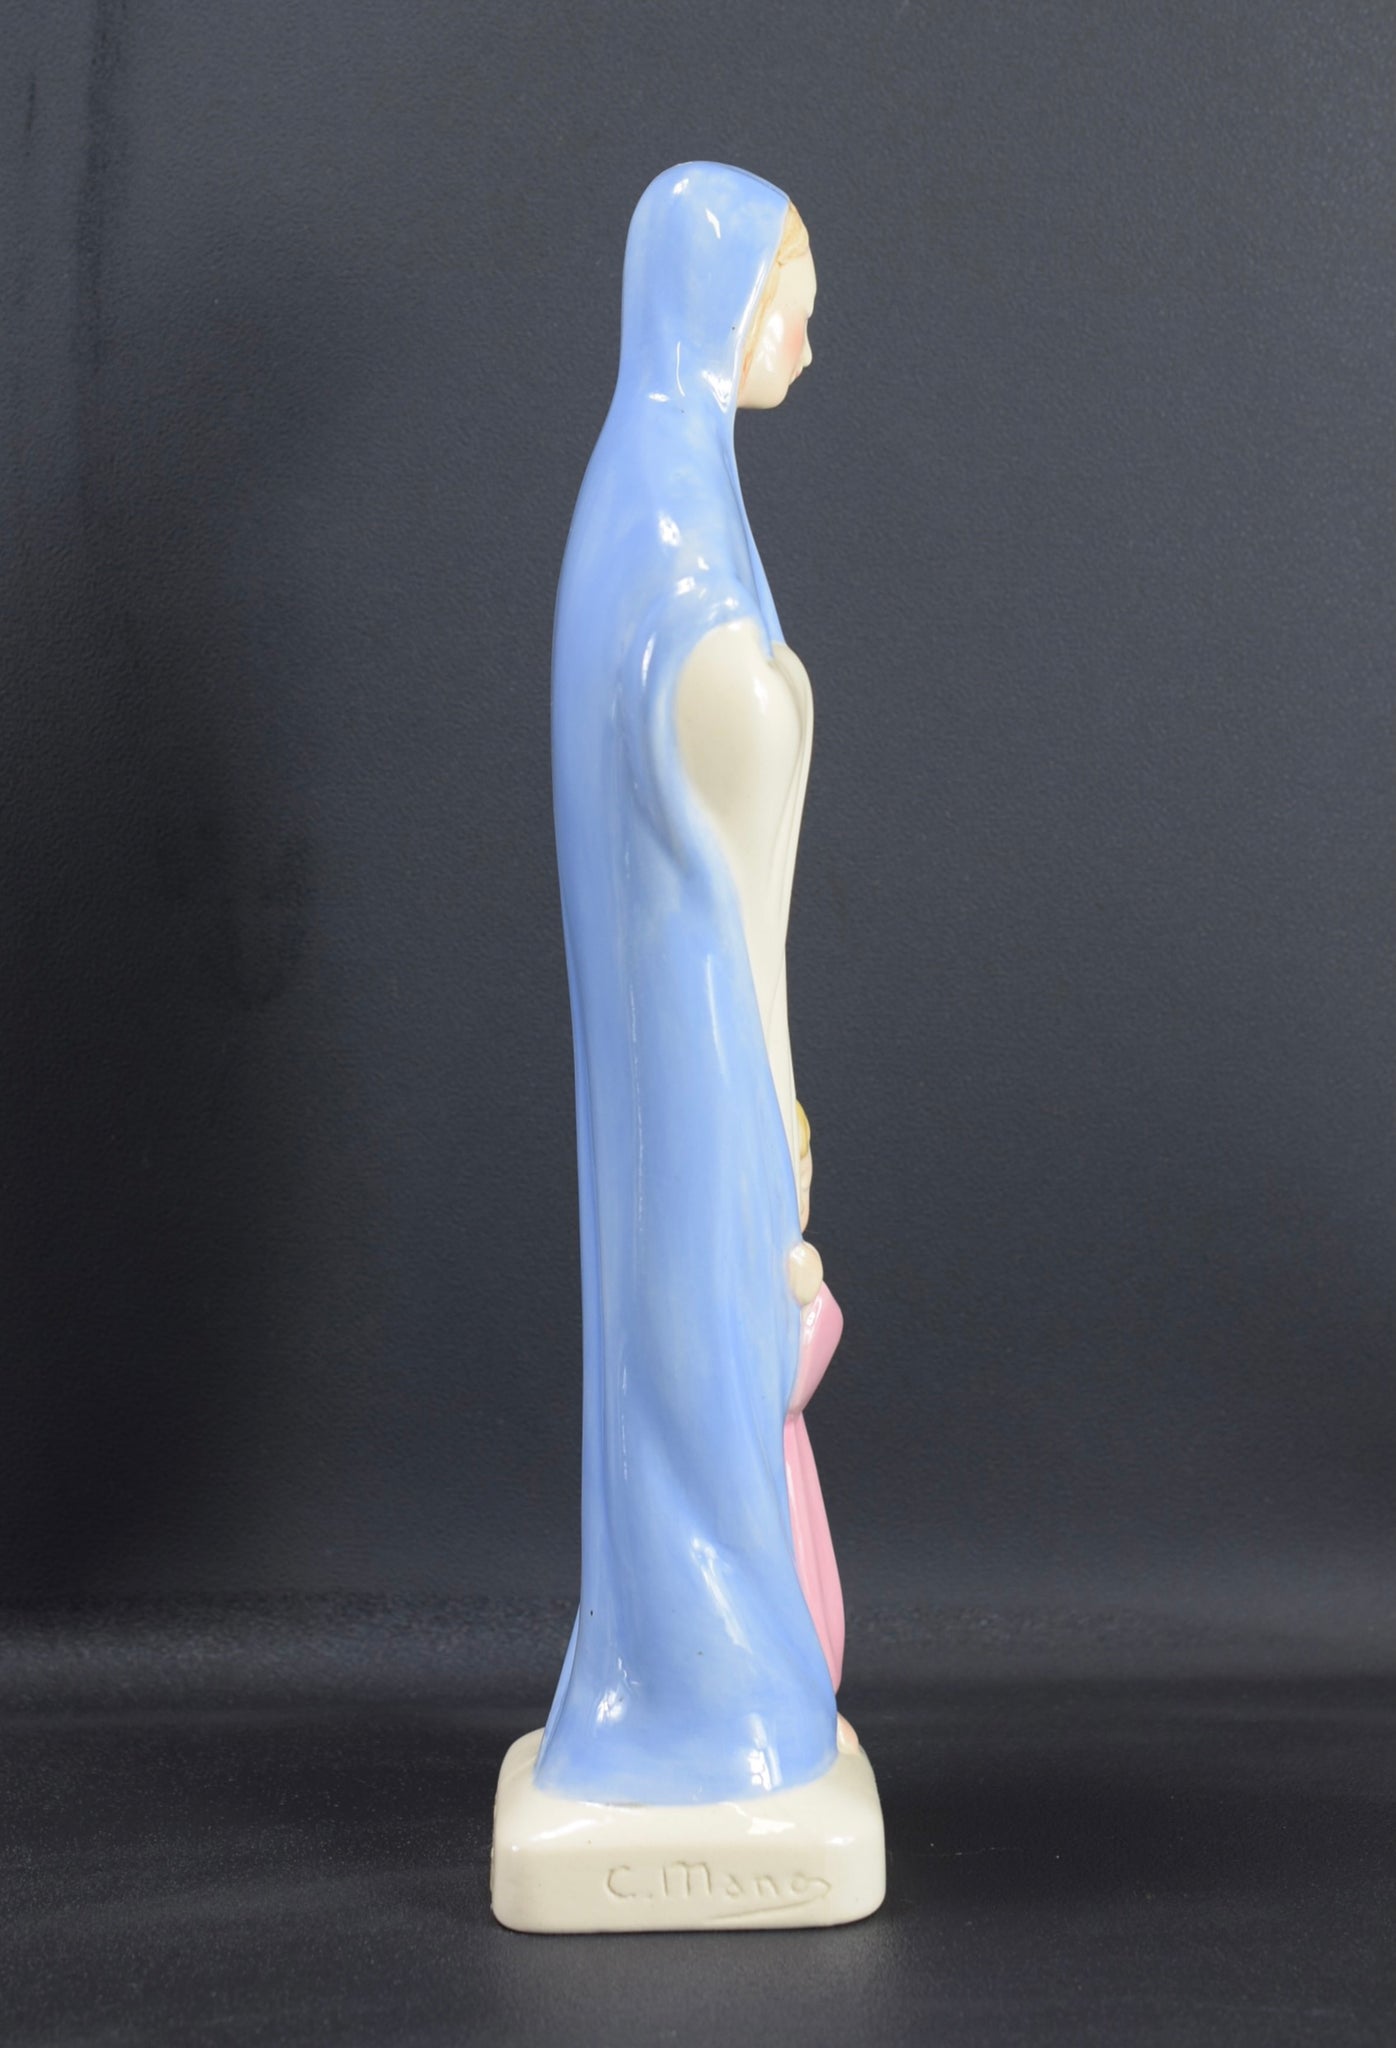 Virgin Mary and Praying Child Statue